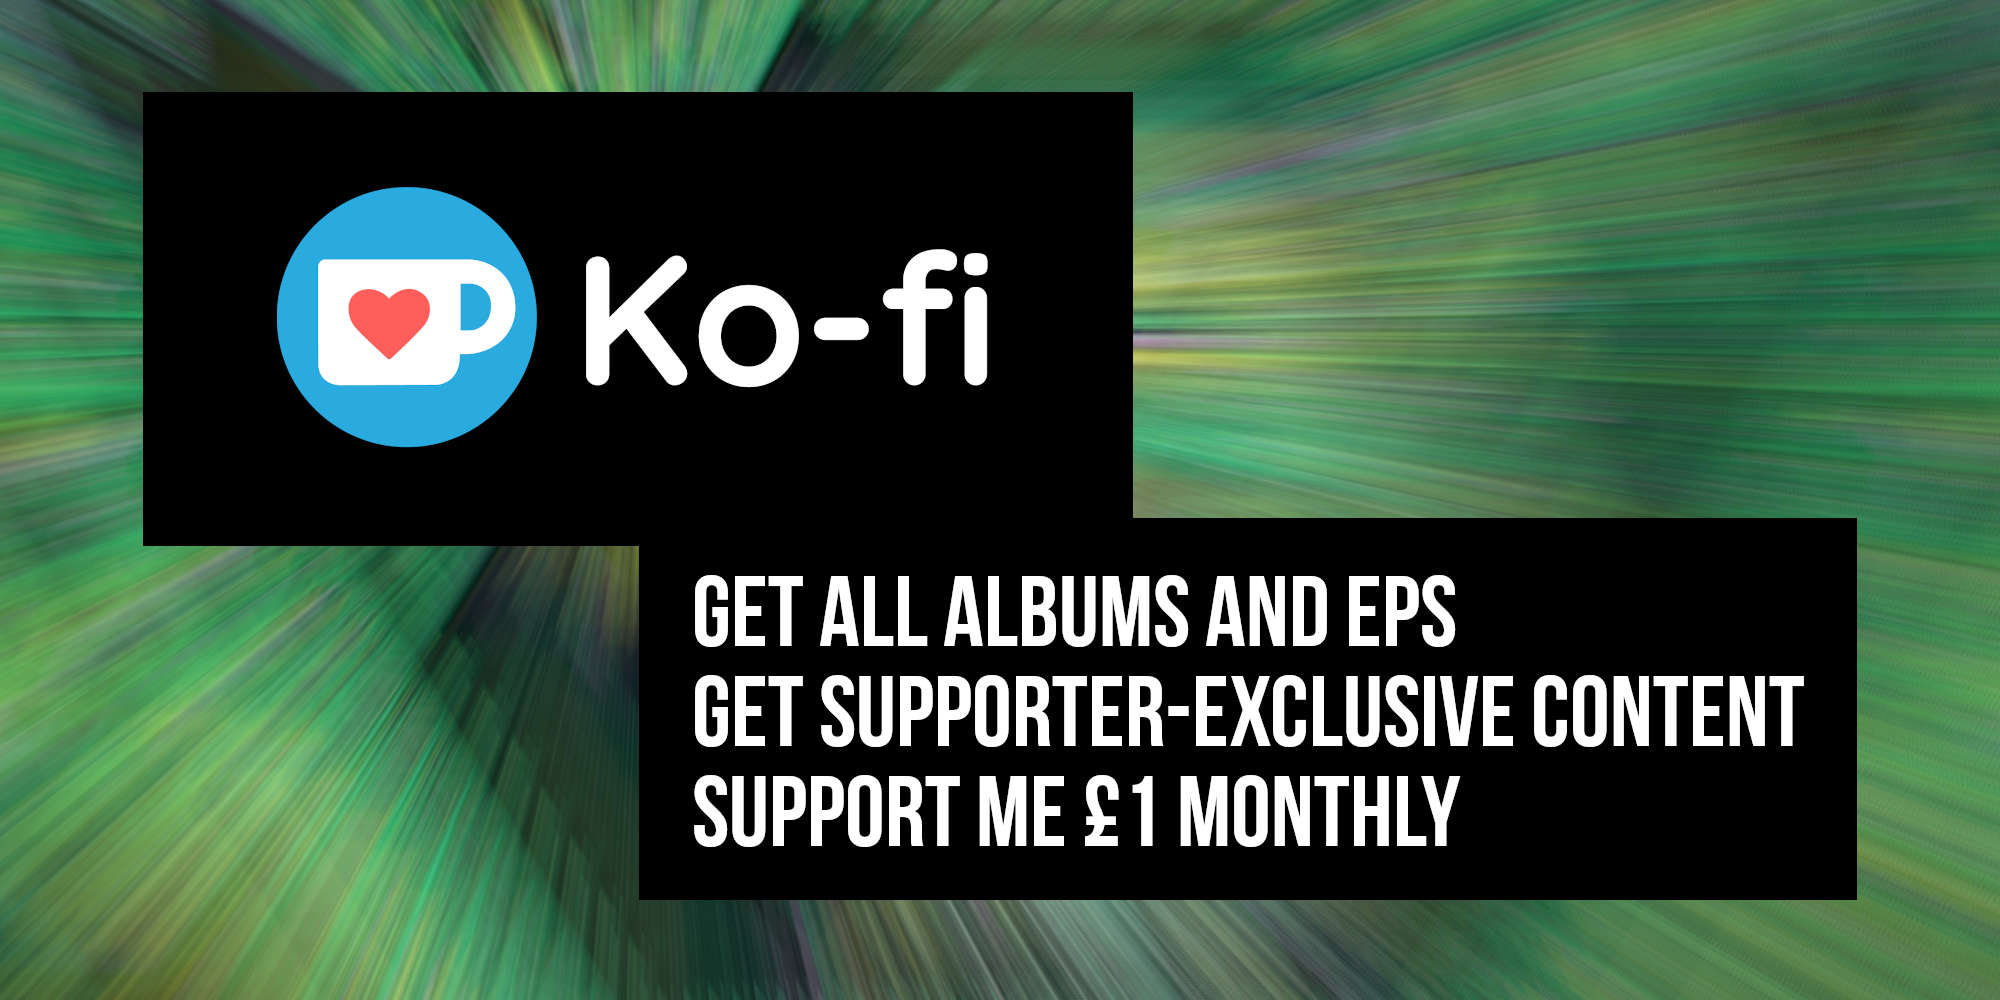 Support Sevish monthly on Ko-fi, get all albums and EPs plus supporter-exclusive content